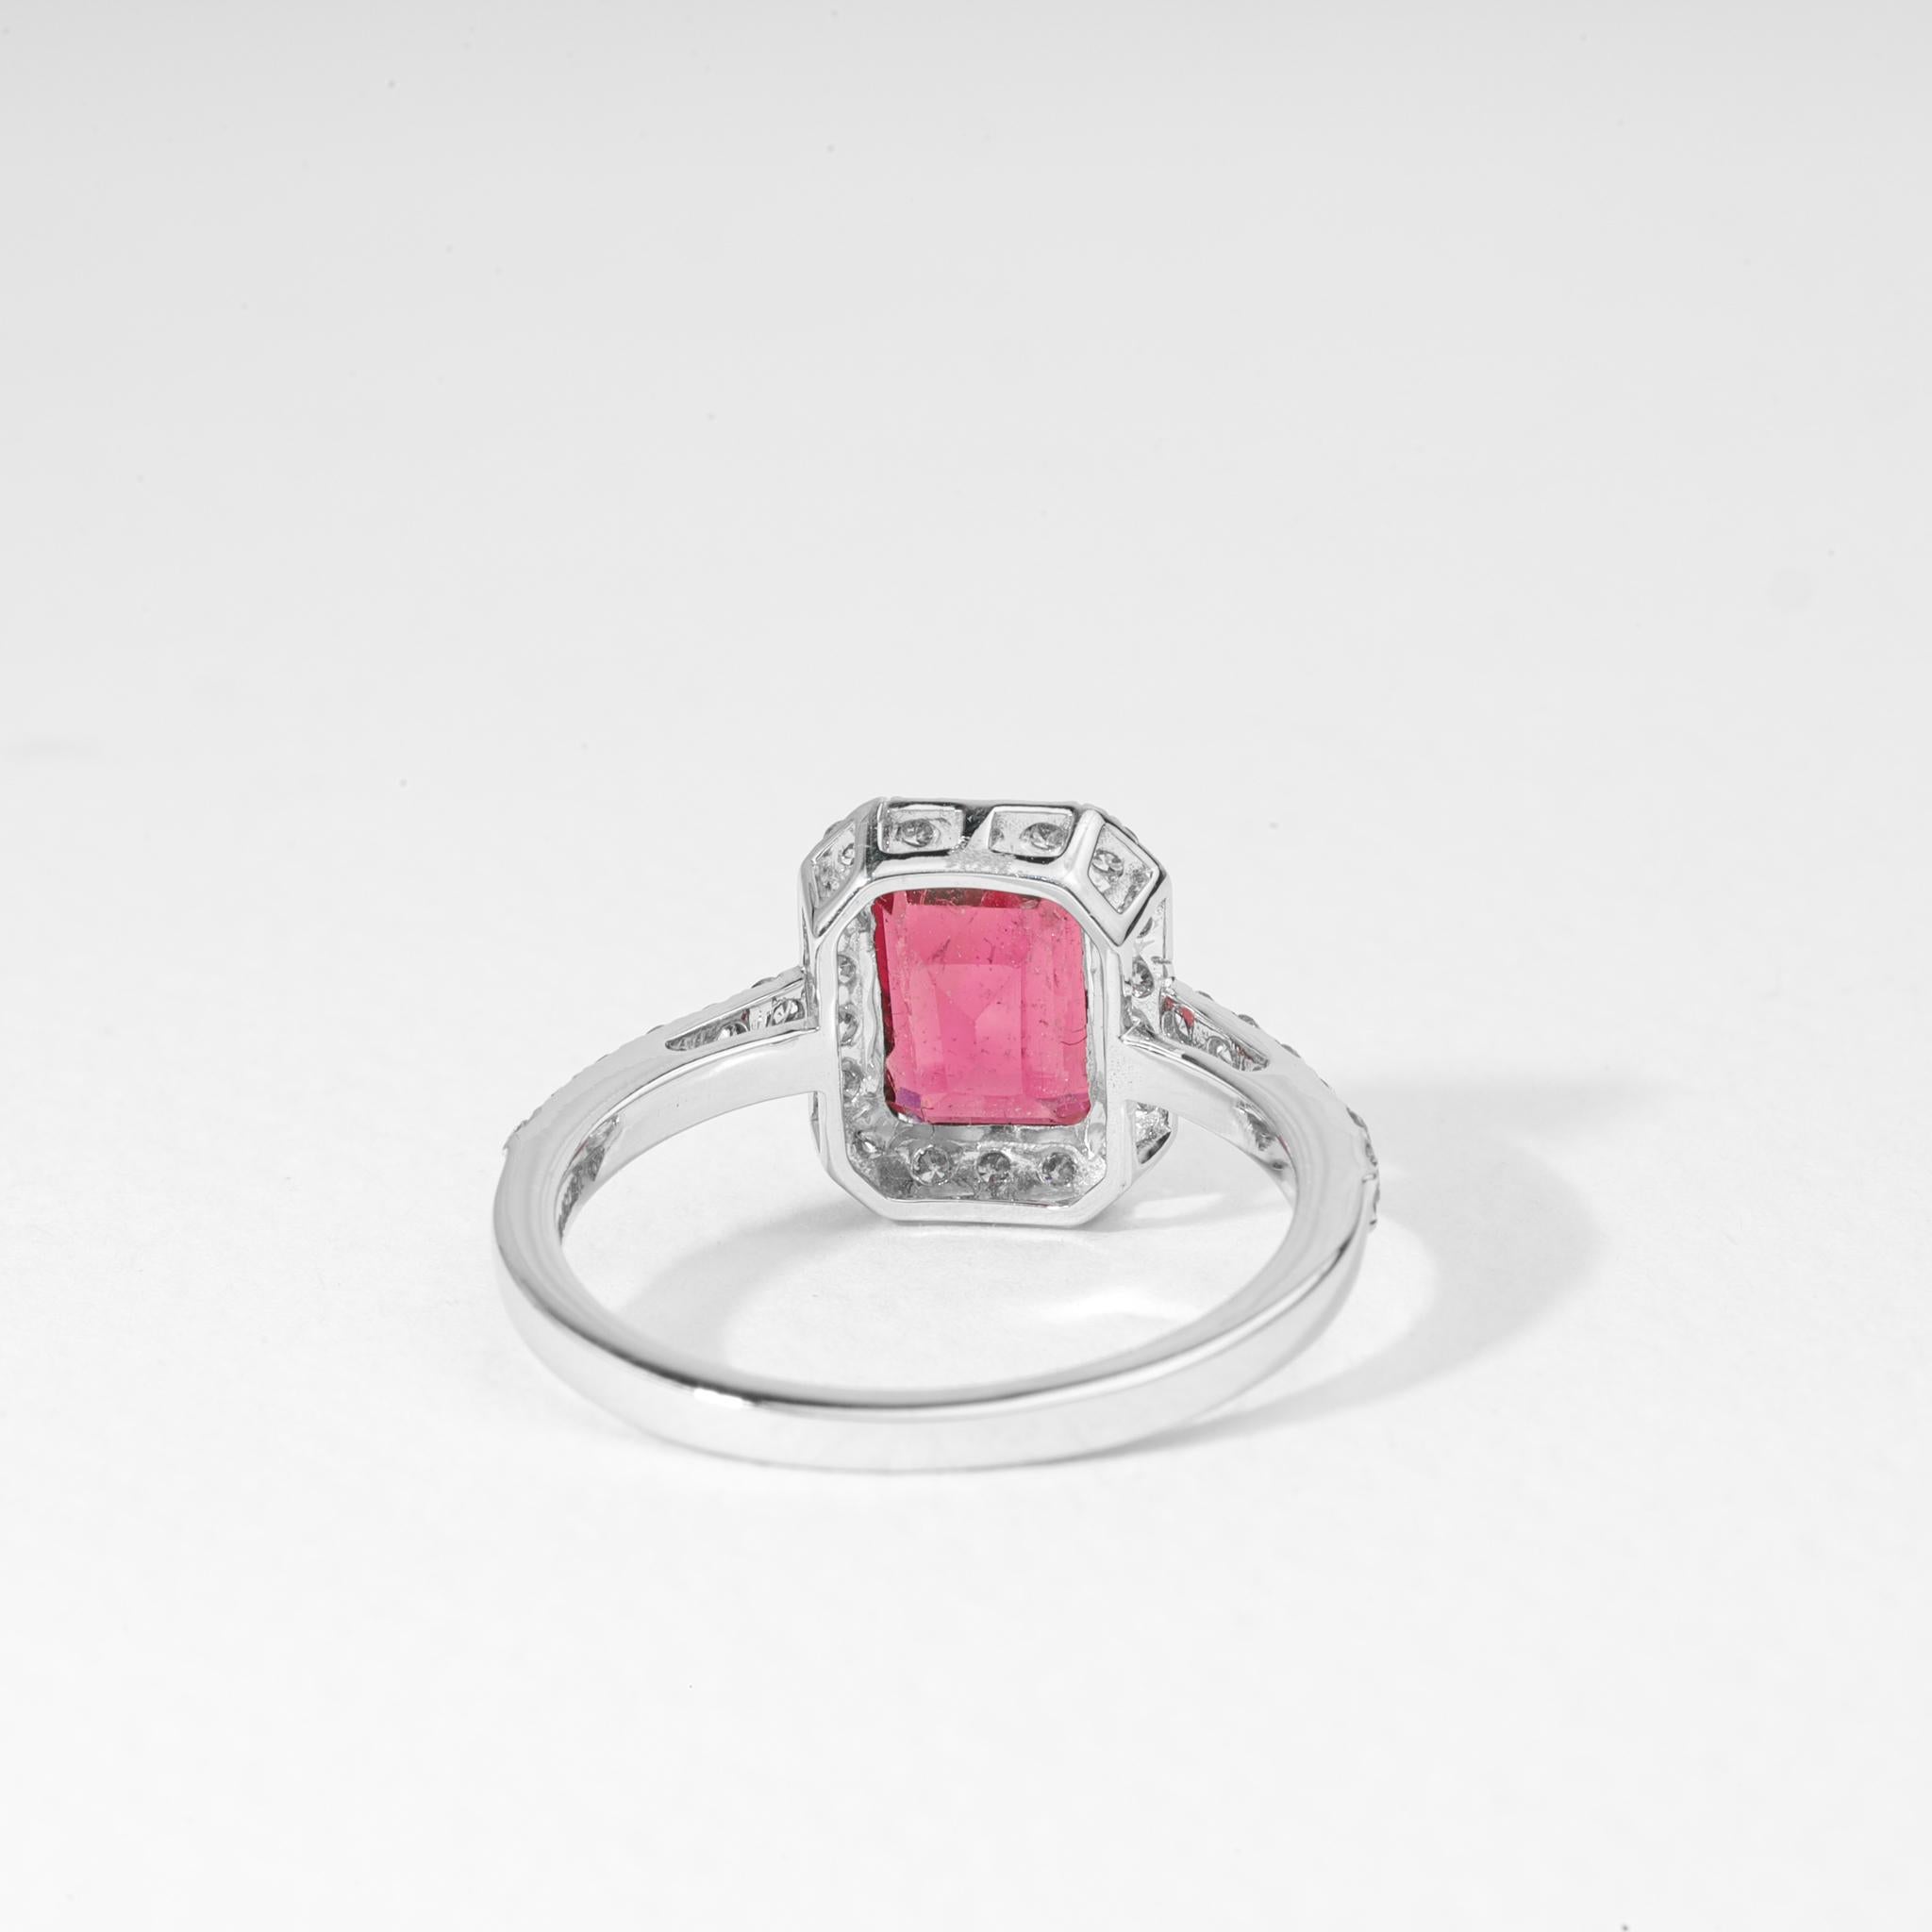 1.5 Carat Rubellite Tourmaline with 0.5Ct Diamonds Cocktail Ring 18k White

Available in 18k White gold.

Same design can be made also with other custom gemstones per request.

Product details:

- Side diamond - approx. 0.5 carat E VS

- Main stone